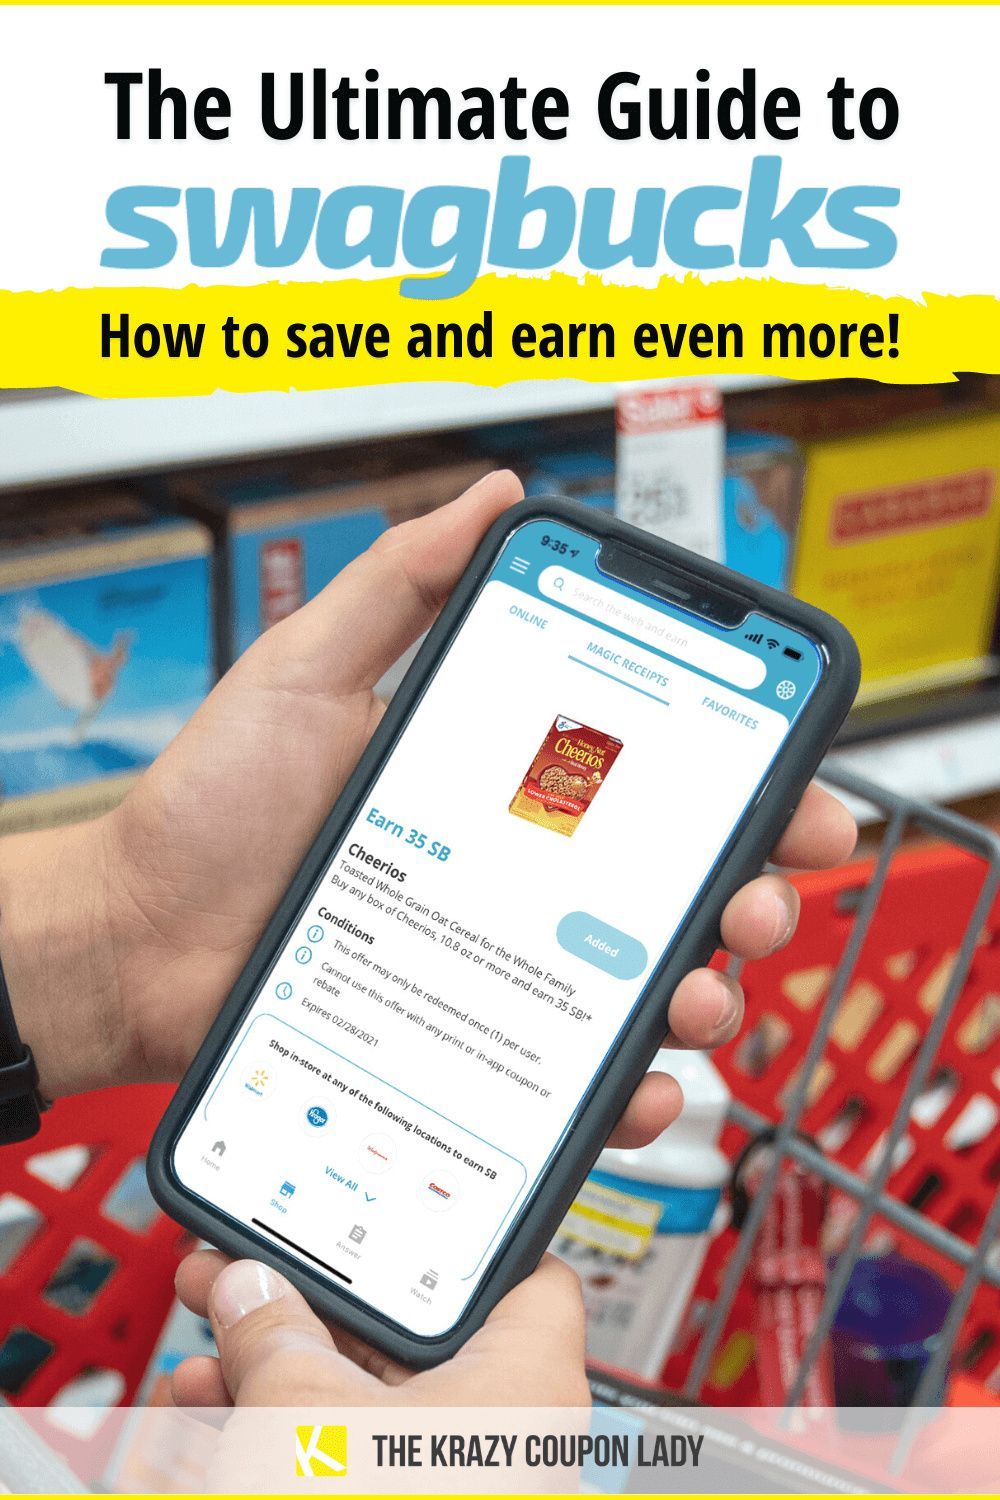 Swagbucks: Save More Shopping with This Rebate App Guide | Swagbucks